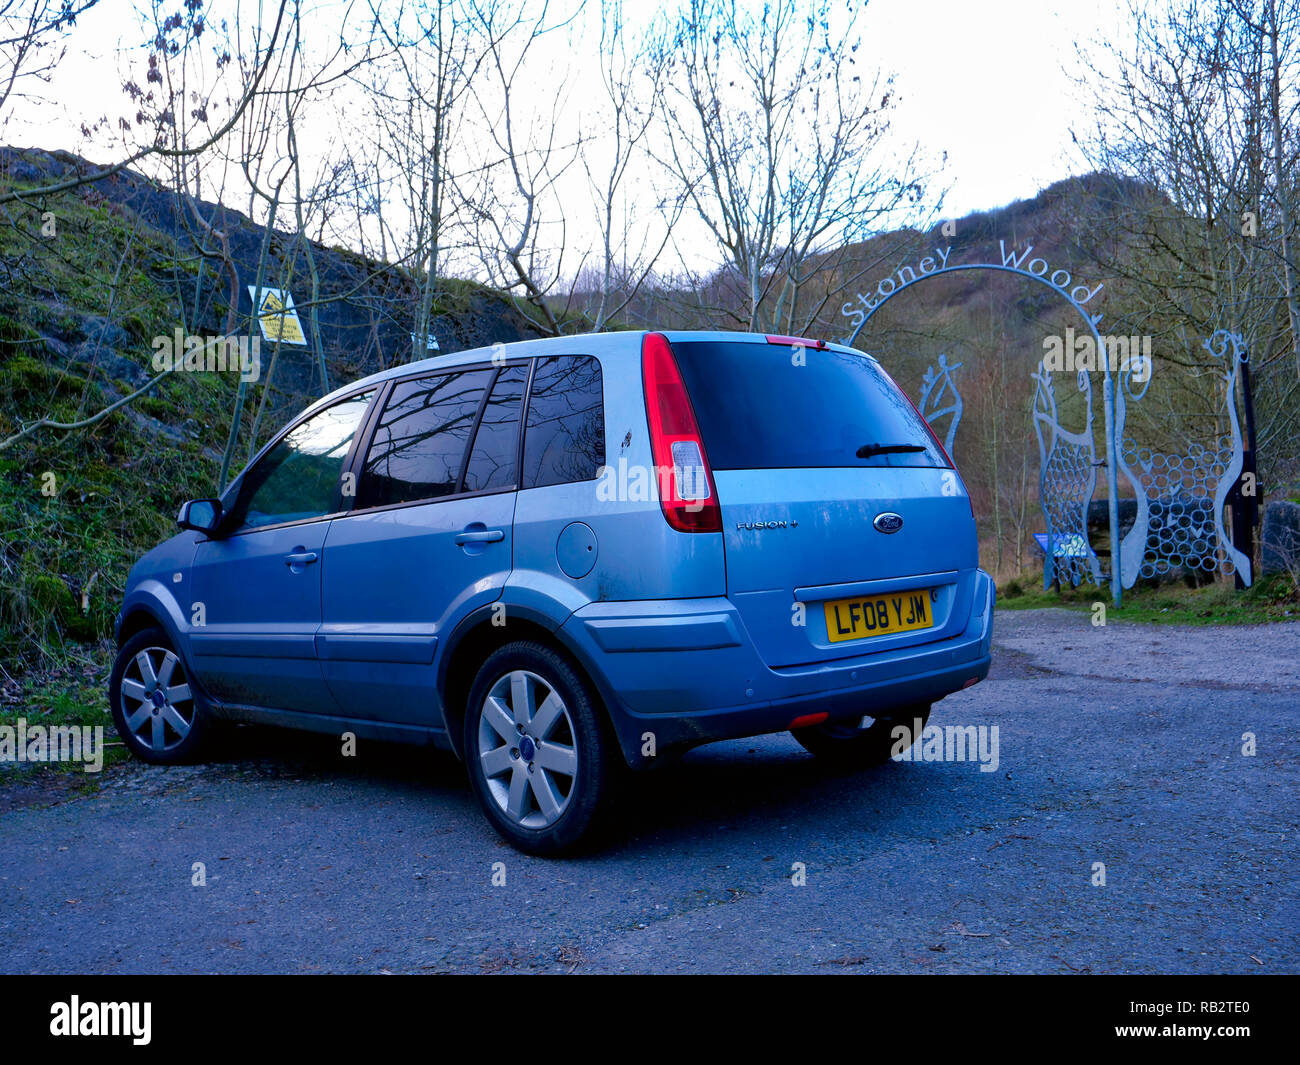 Derbyshire, UK. 06th Jan, 2019. Derbyshire, UK. 6th Jan 2019. An abandoned light blue Ford Fusion + car parked at Stoney Wood entrance, Wirksworth, Derbyshire, since the New Year has been reported to the Police as possible missing persons or abandoned vehicle, it's near the potentially dangerous old Tarmac Middle Peak Quarry workings Credit: Doug Blane/Alamy Live News Credit: Doug Blane/Alamy Live News Stock Photo